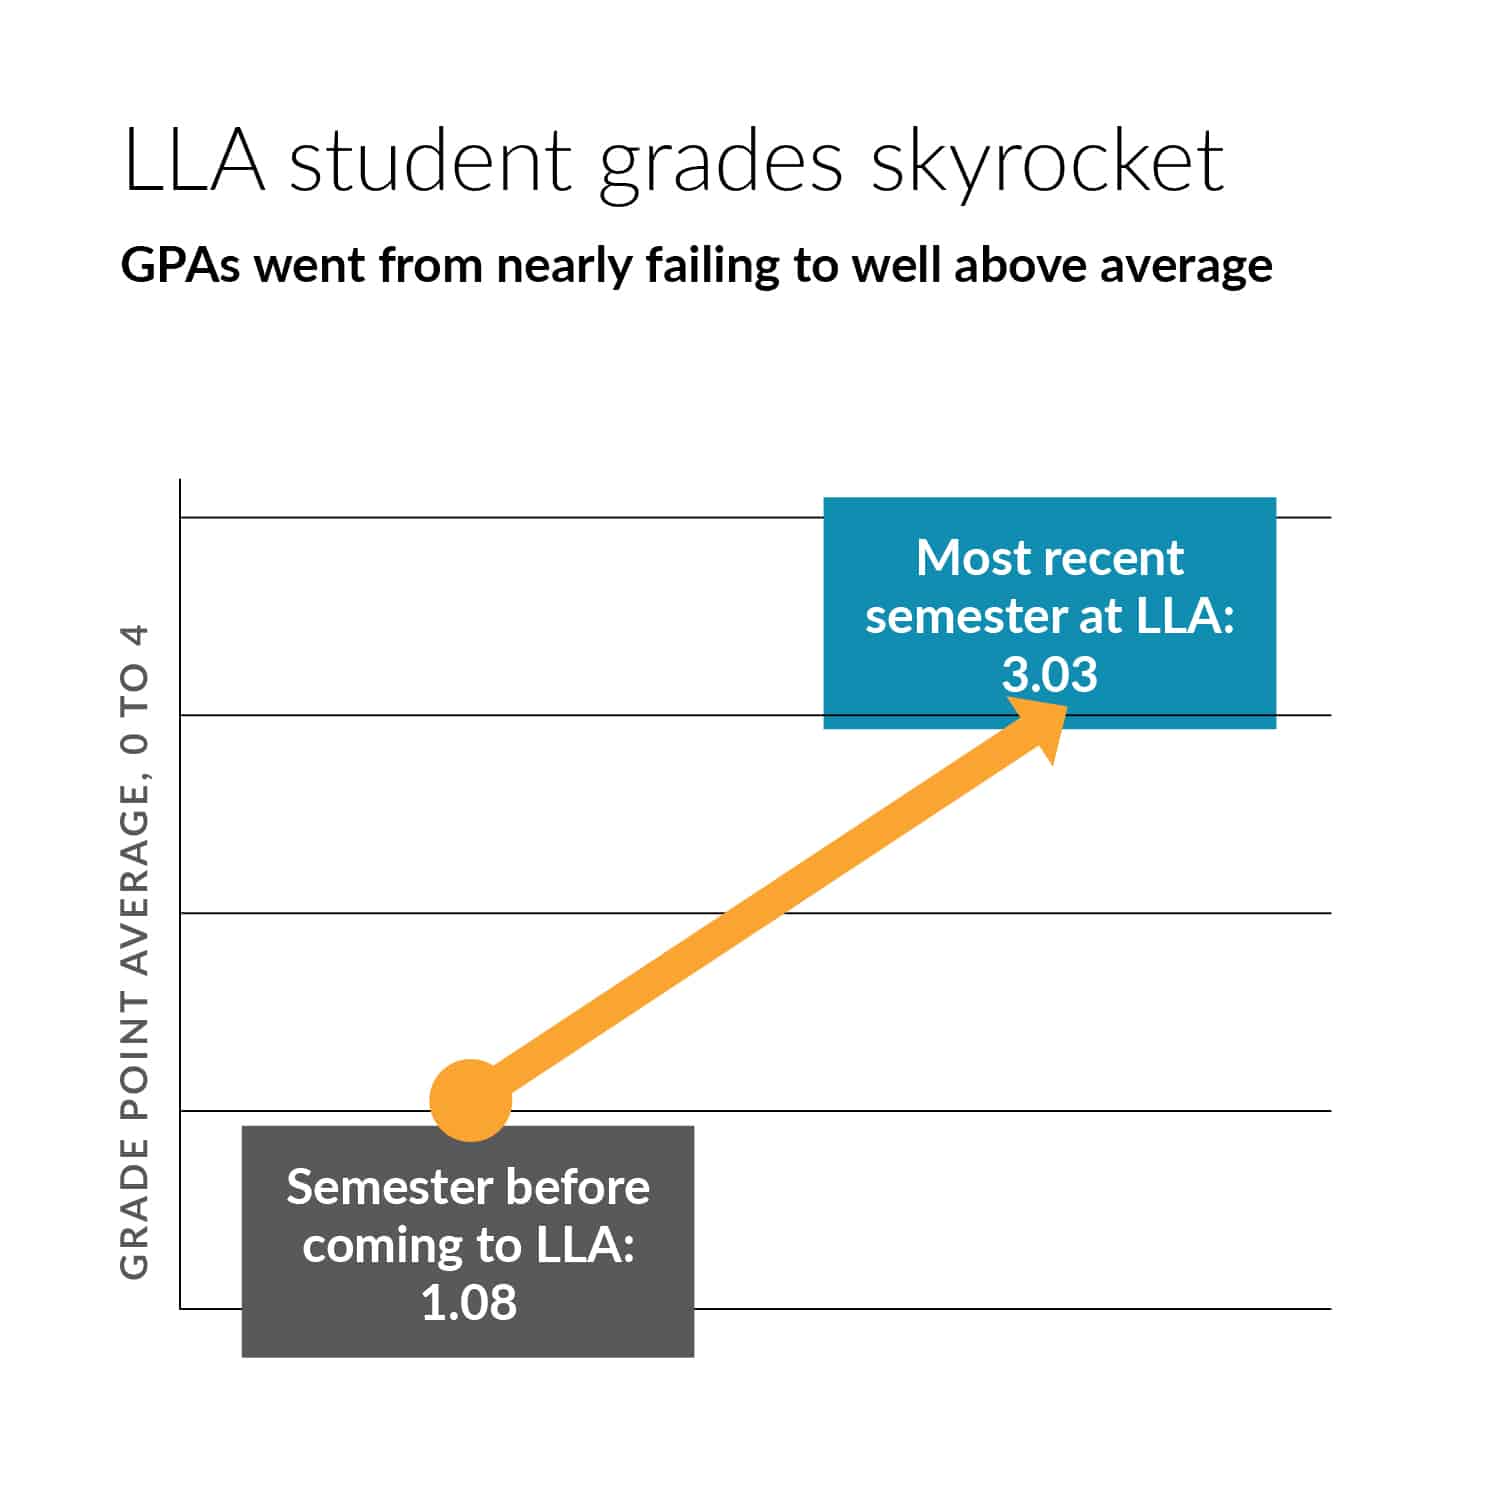 Students drastically increased their grades after coming to LLA: average GPA the semester before coming to LLA: 1.08; most recent semester at LLA: 3.03